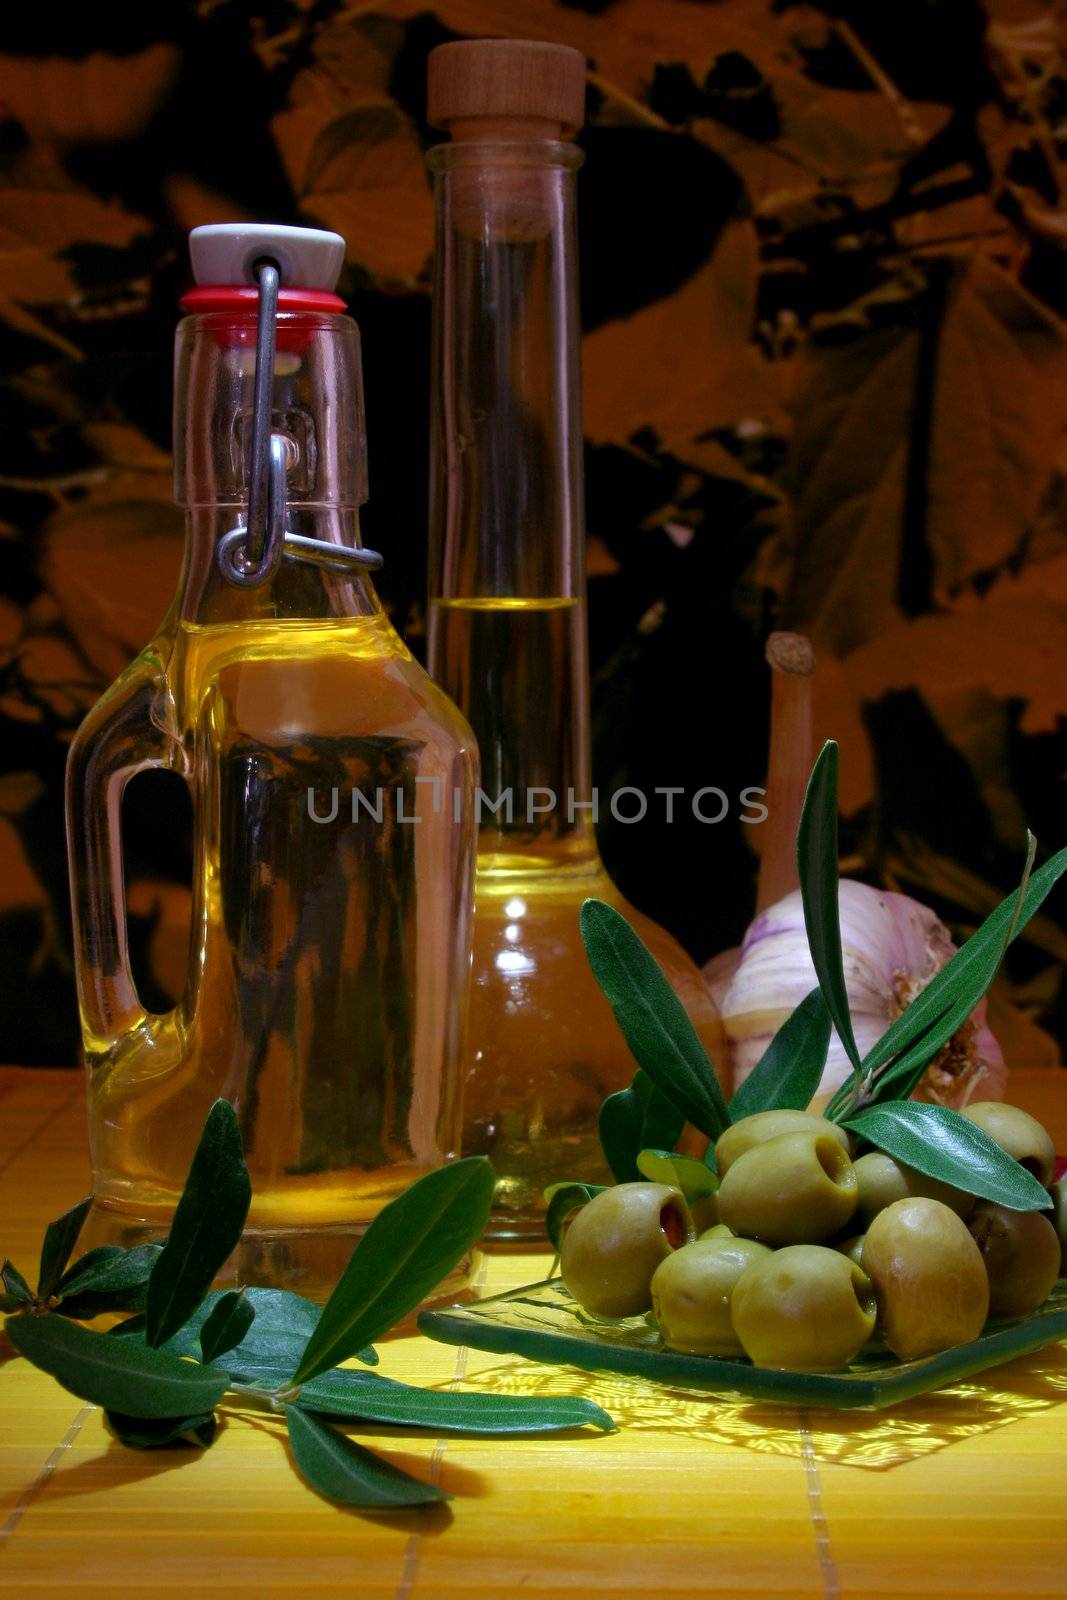 Olive oil by silencefoto